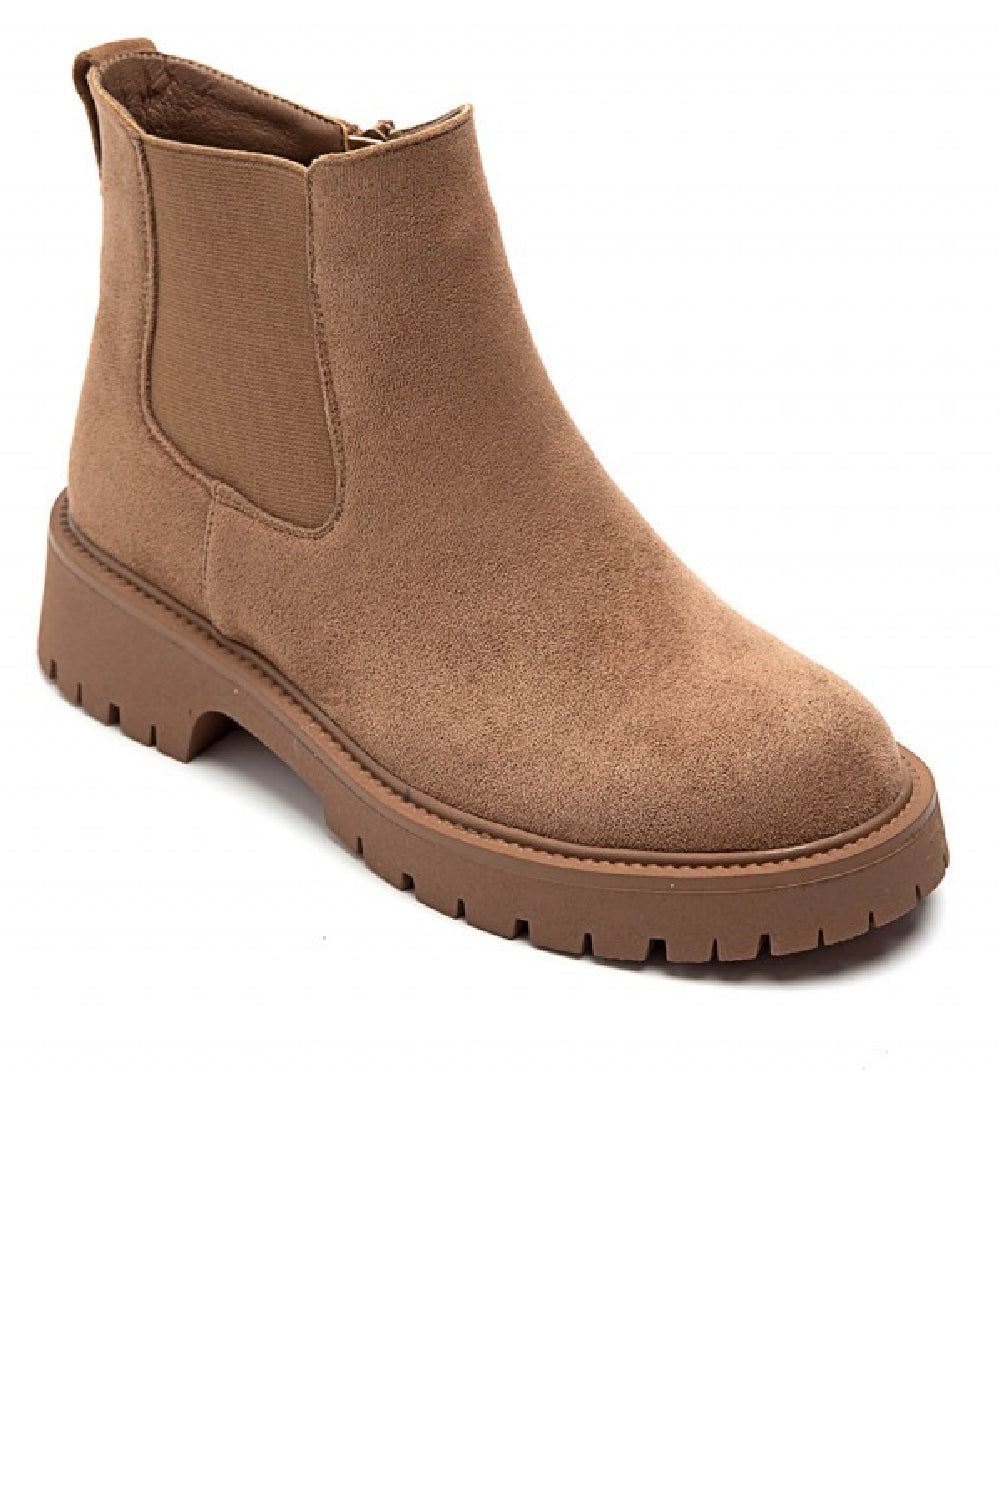 CAMEL SUEDE FLAT CLASSIC ELASTICATED CHELSEA ANKLE BOOTS